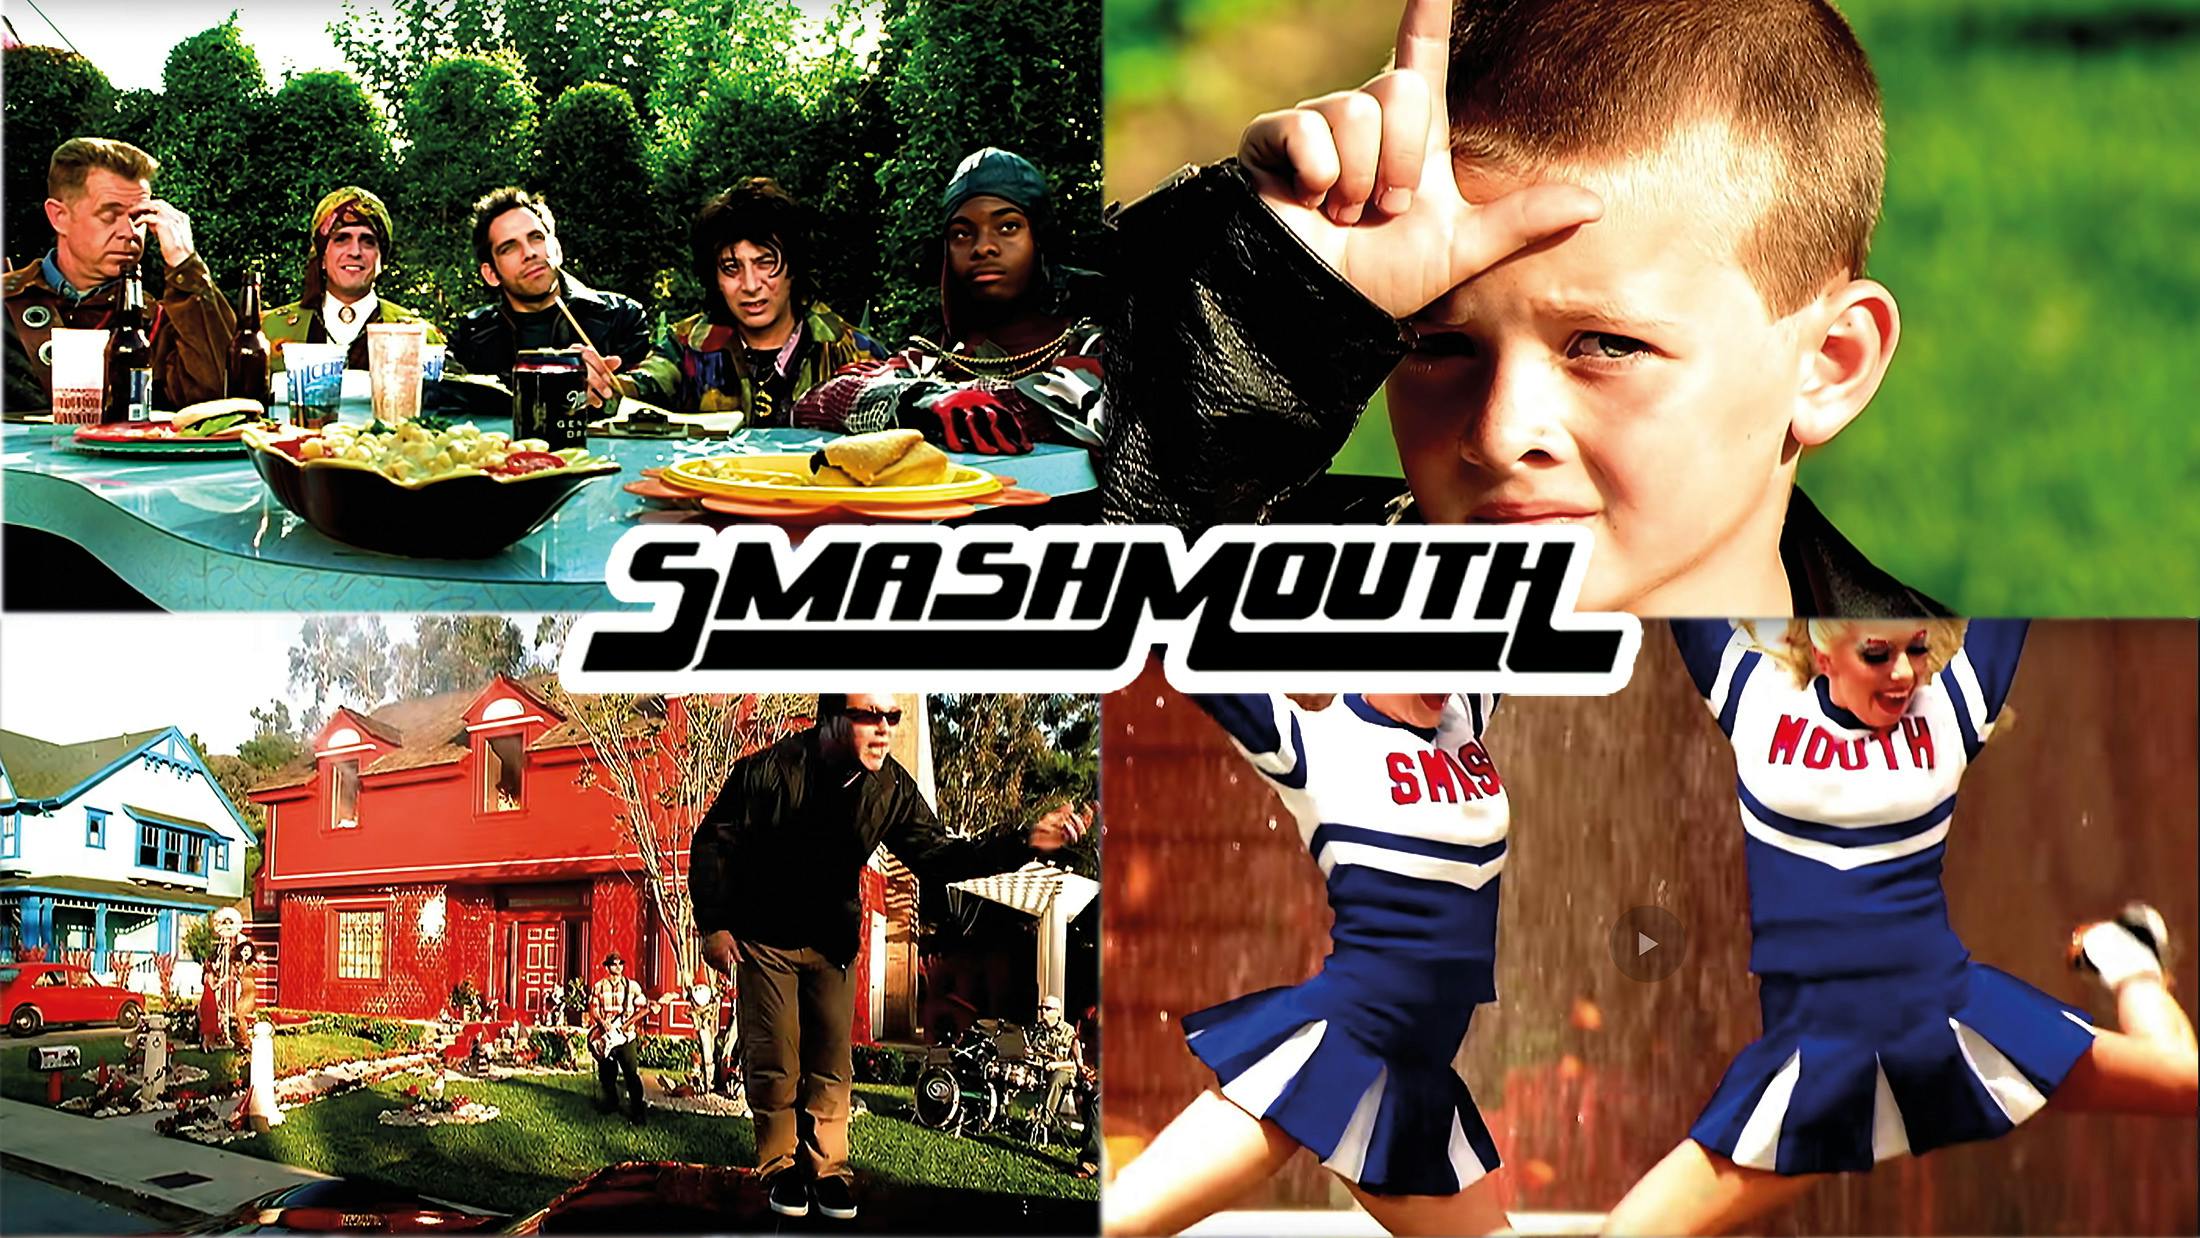 A Deep Dive Into The Video For All Star By Smash Mouth